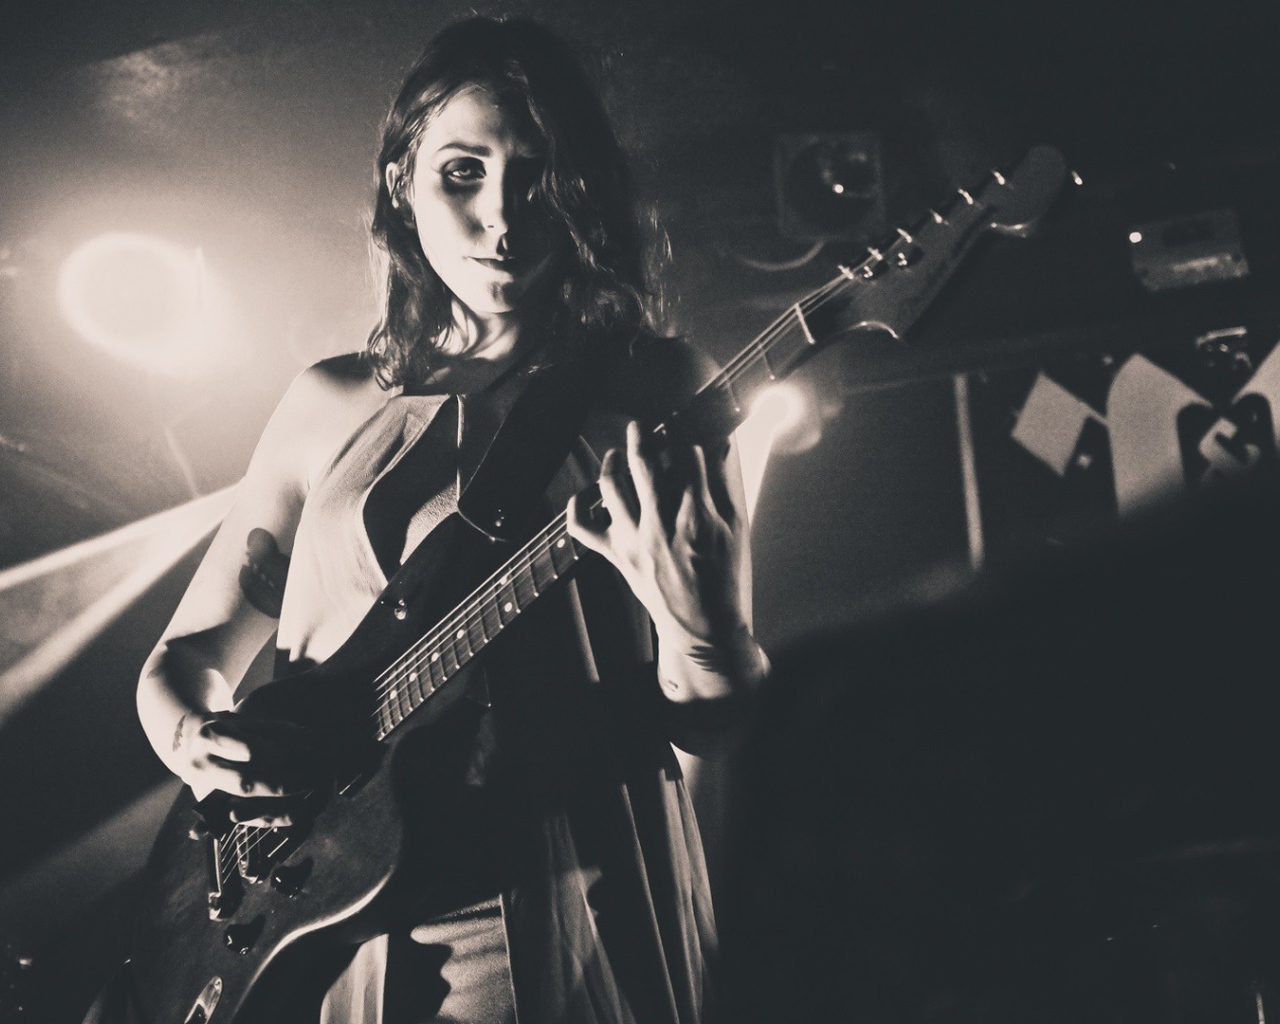 Chelsea Wolfe musician with a guitar